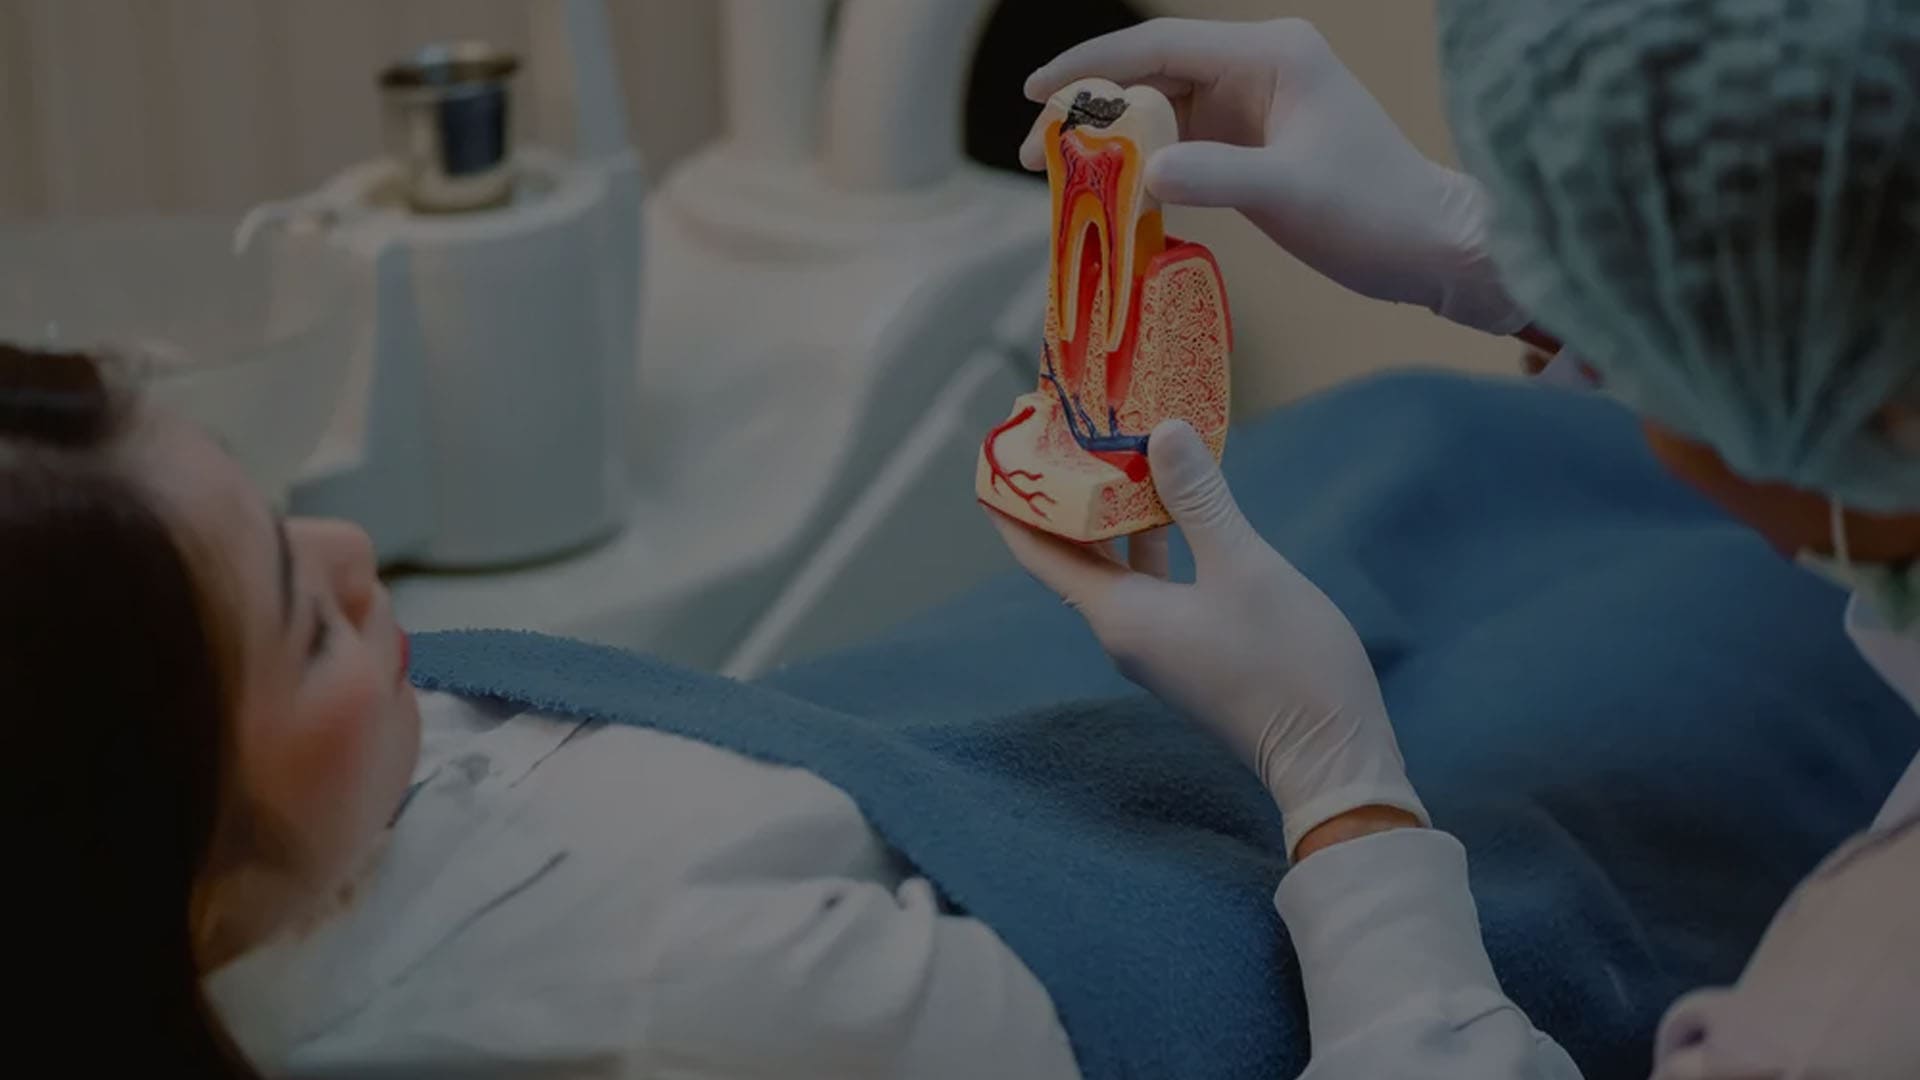 root canal treatment in chennai